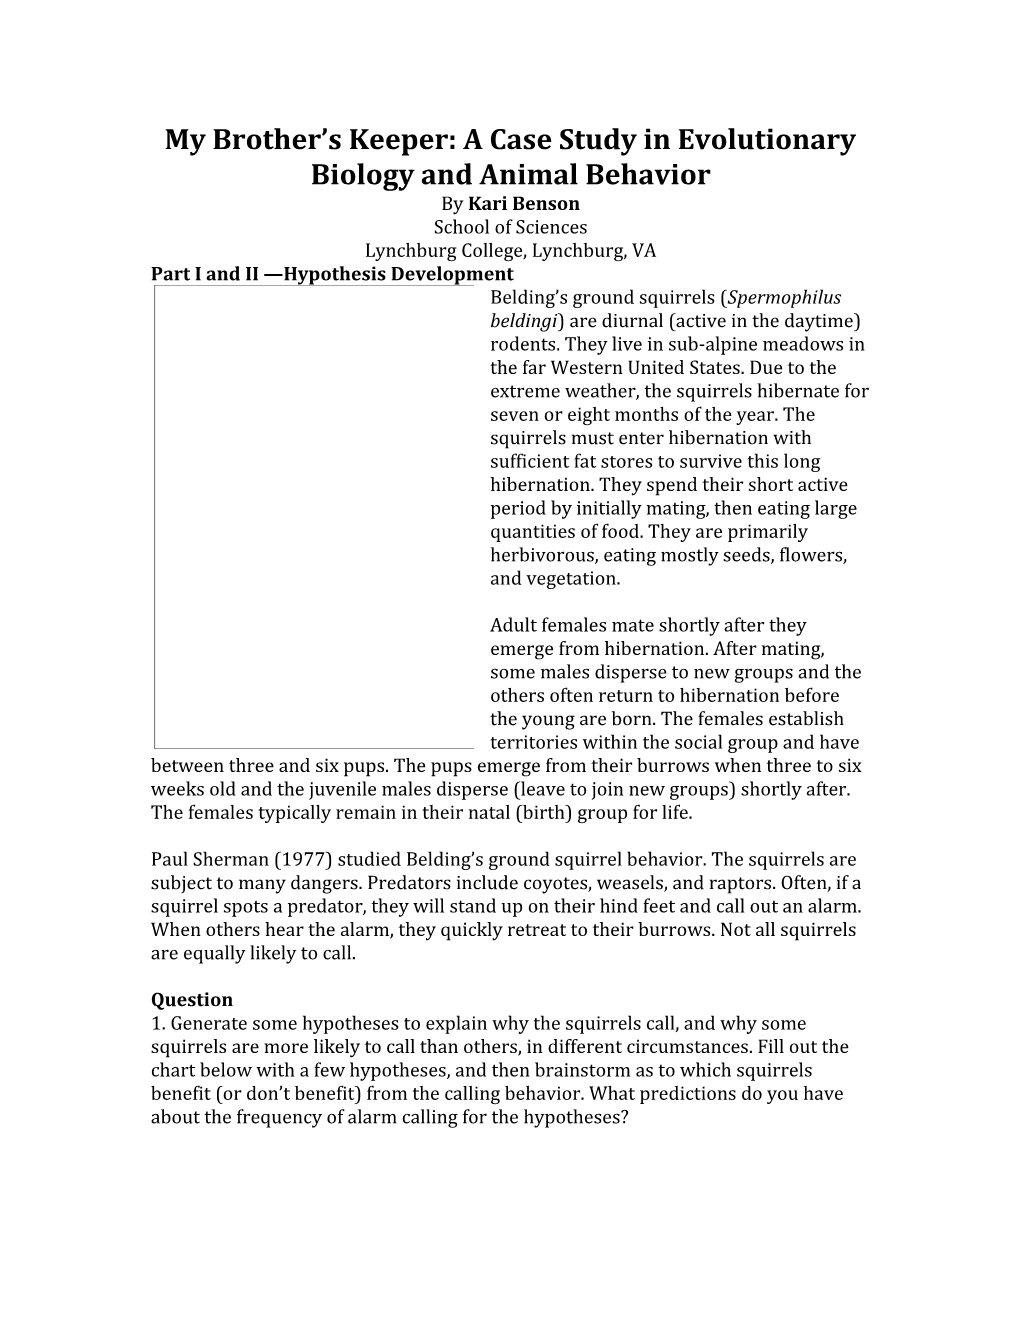 My Brother S Keeper: a Case Study in Evolutionary Biology and Animal Behavior